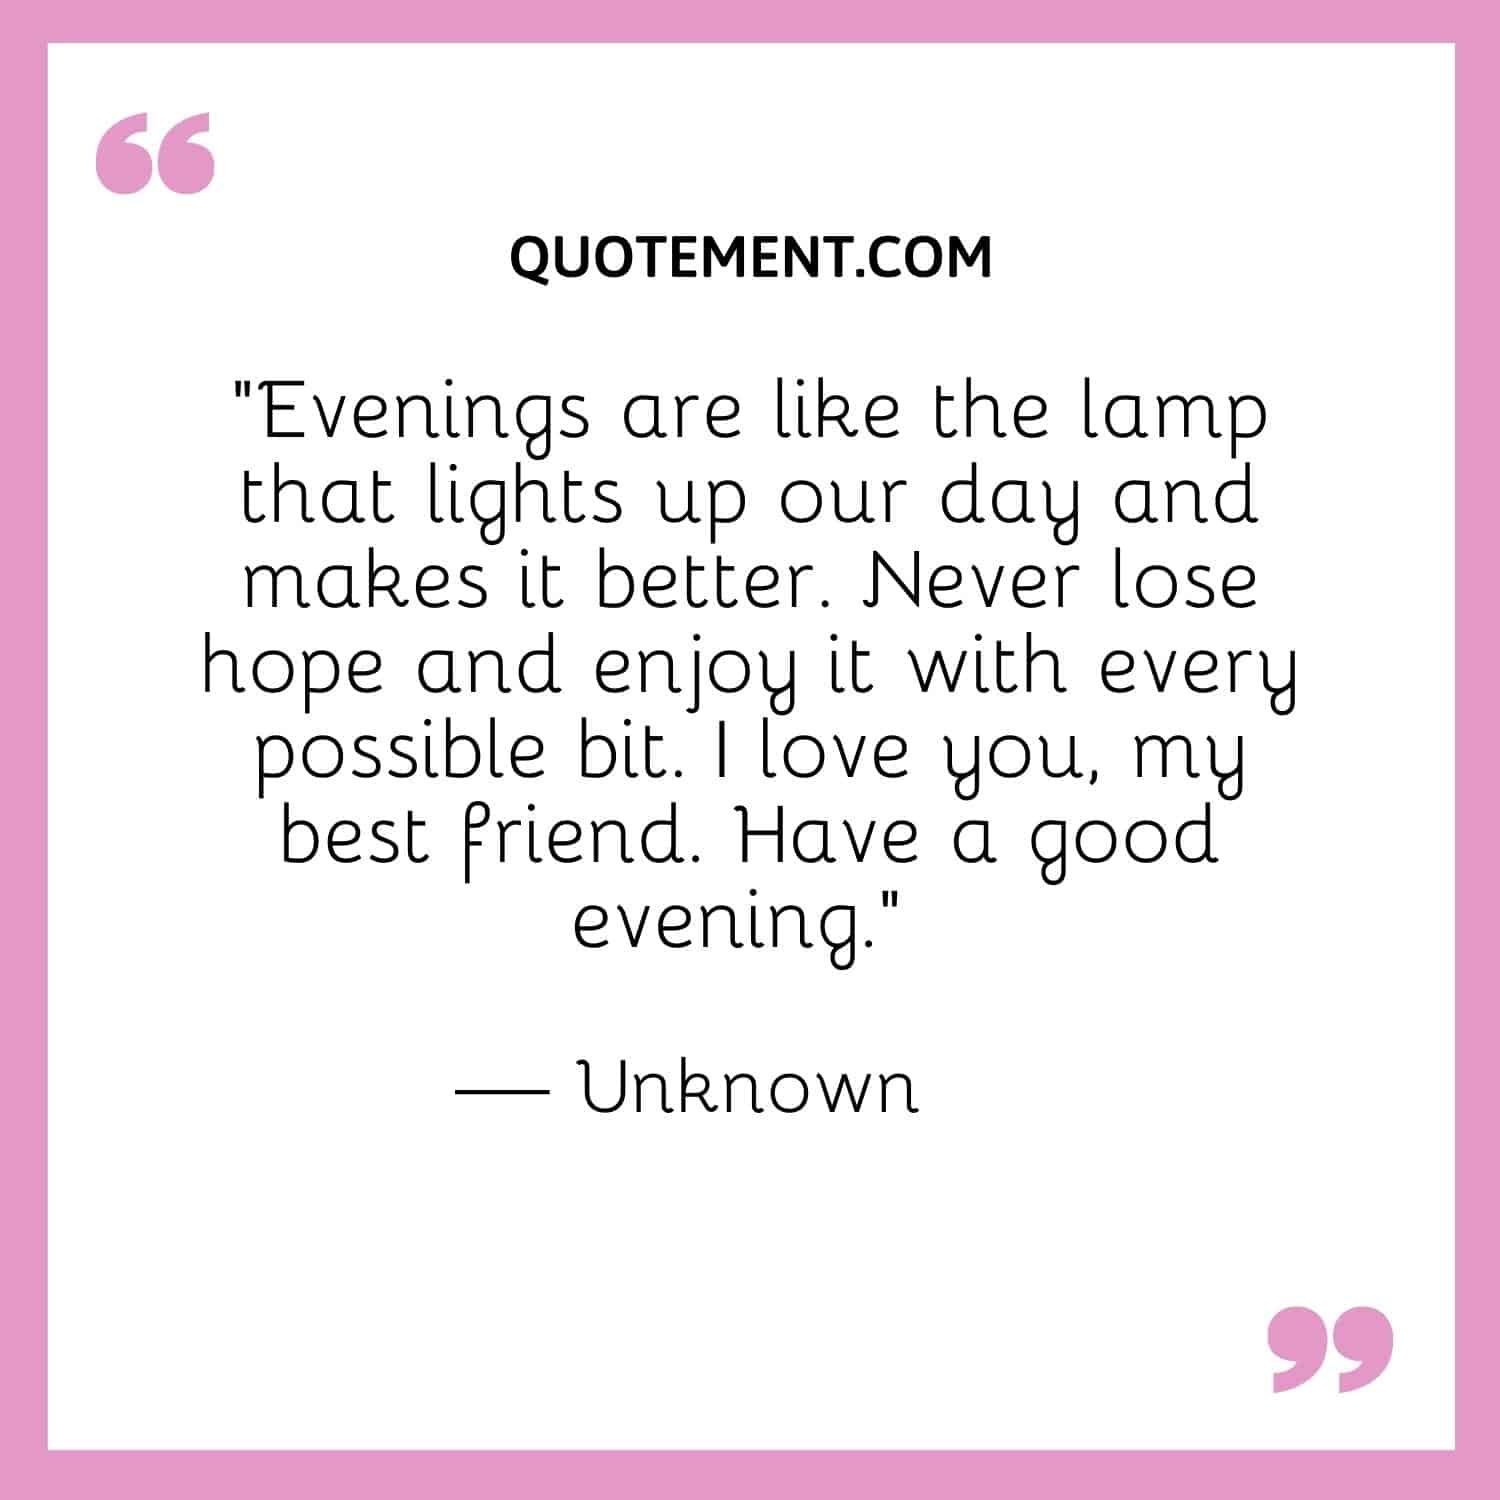 Evenings are like the lamp that lights up our day